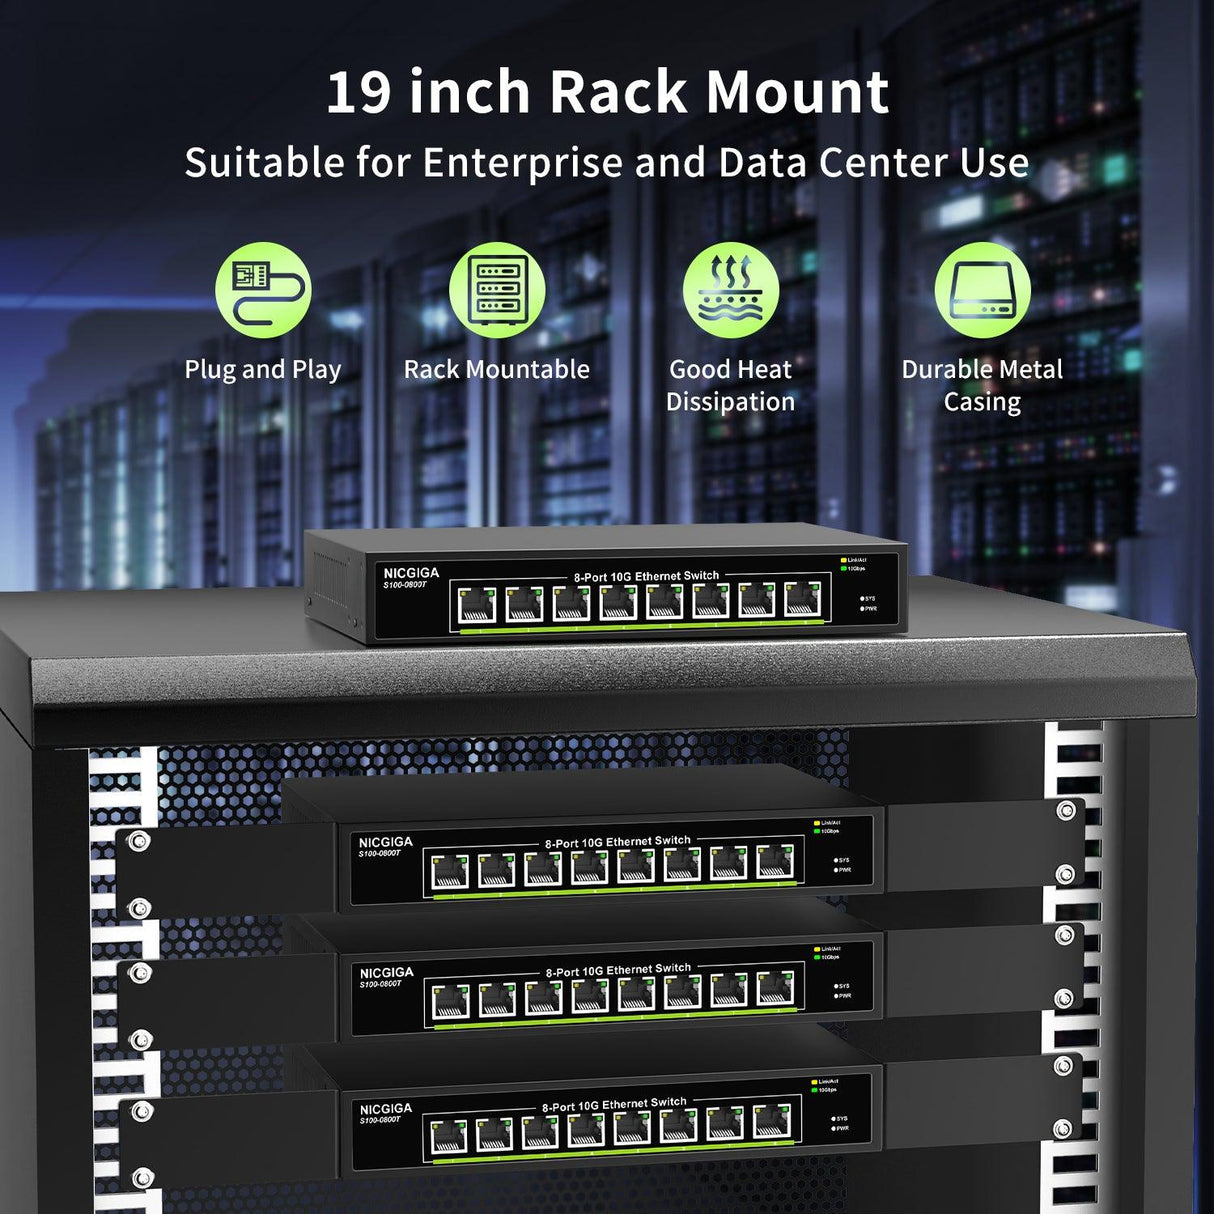 NICGIGA 8 Port 10G Ethernet Switch Unmanaged,with 8X 10Gb Base-T Ports, 10Gbps Network Switch Easy for 10G NAS,PC,WiFi7 Router,10G Adapter/NIC. Desktop or 19-inch Rack Mount, Plug and Play. - NICGIGA